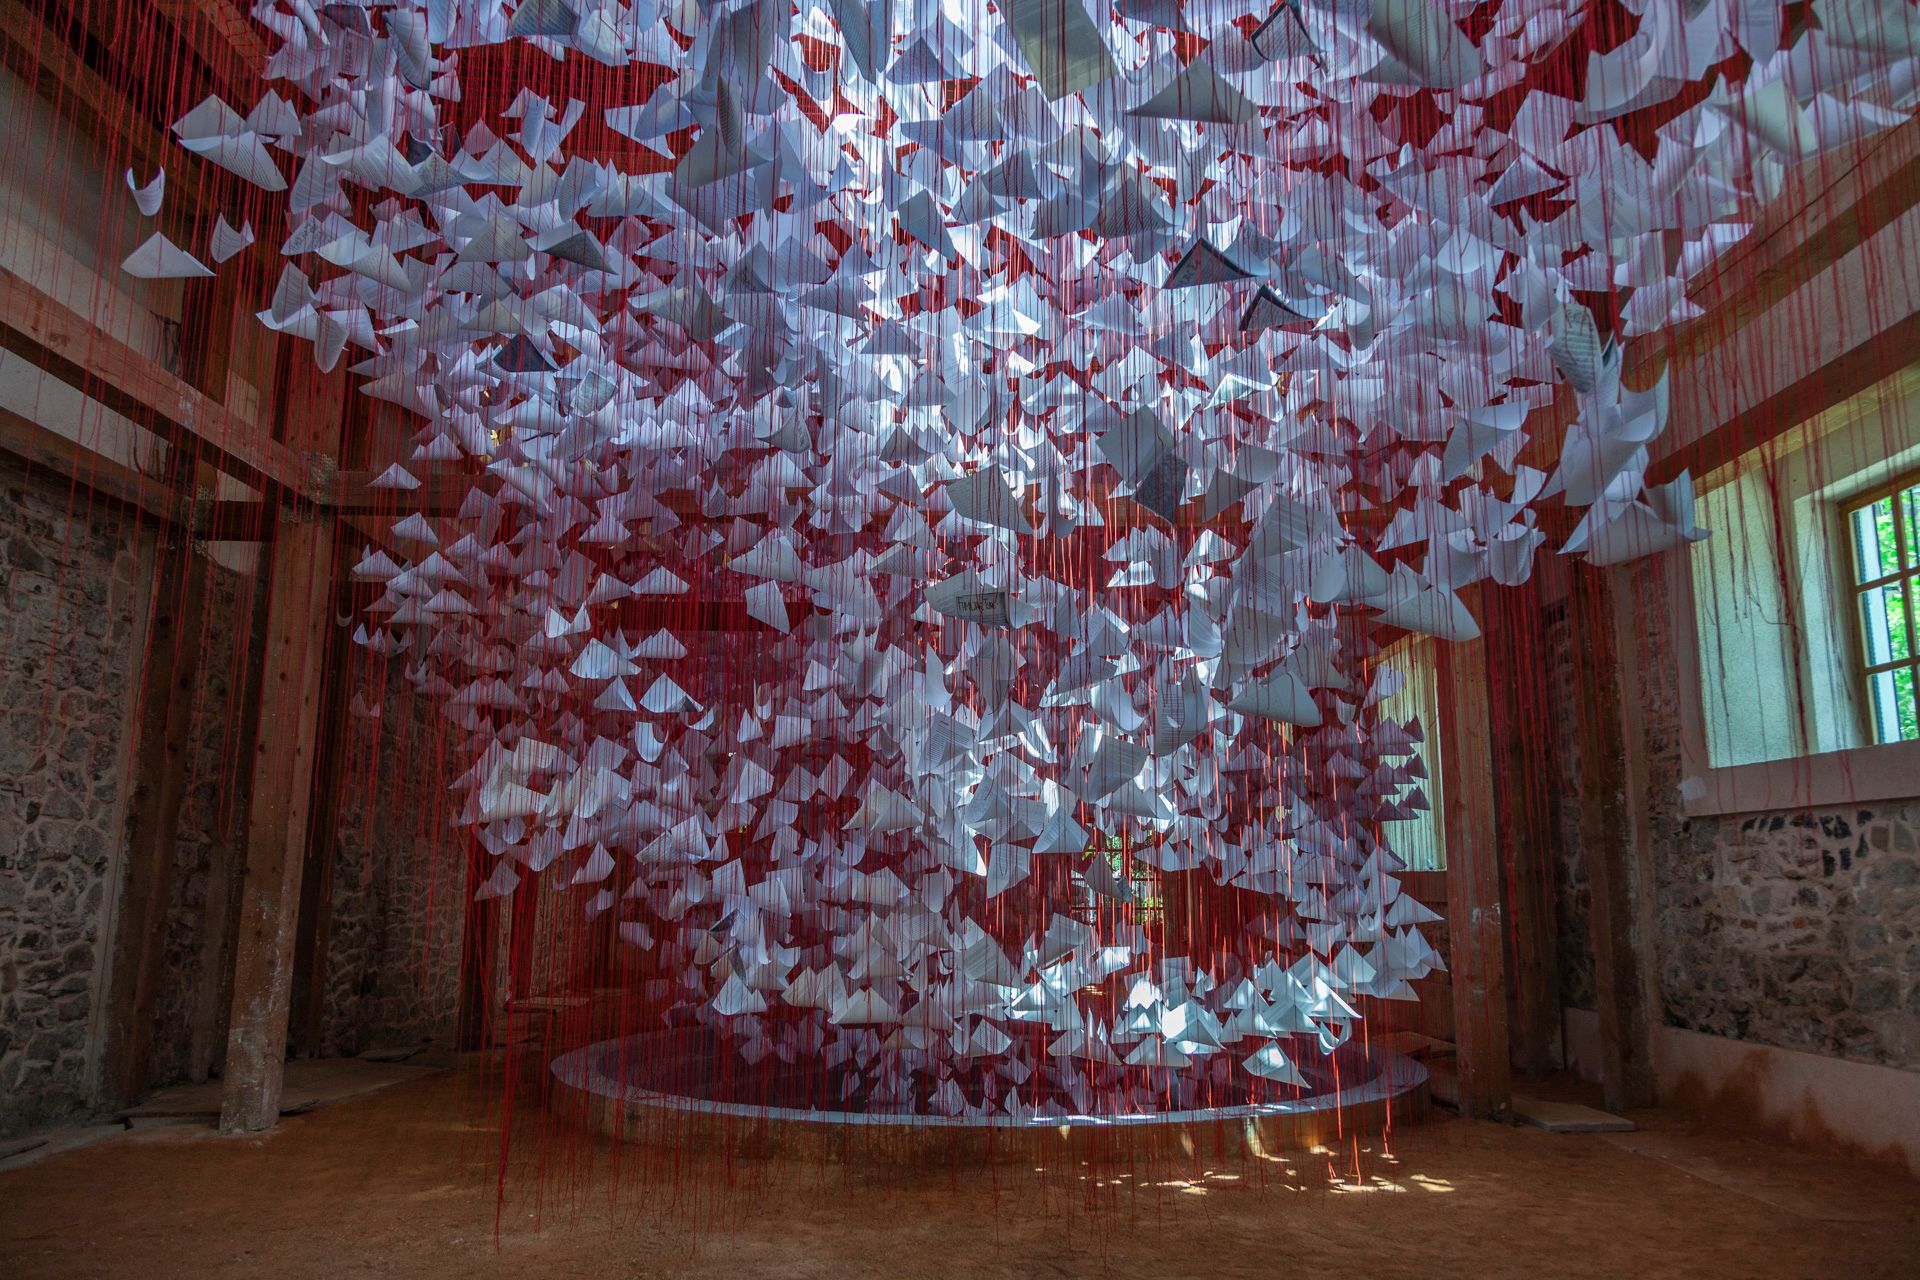 An art installation comprised of sheets of paper suspended by red thread in a room